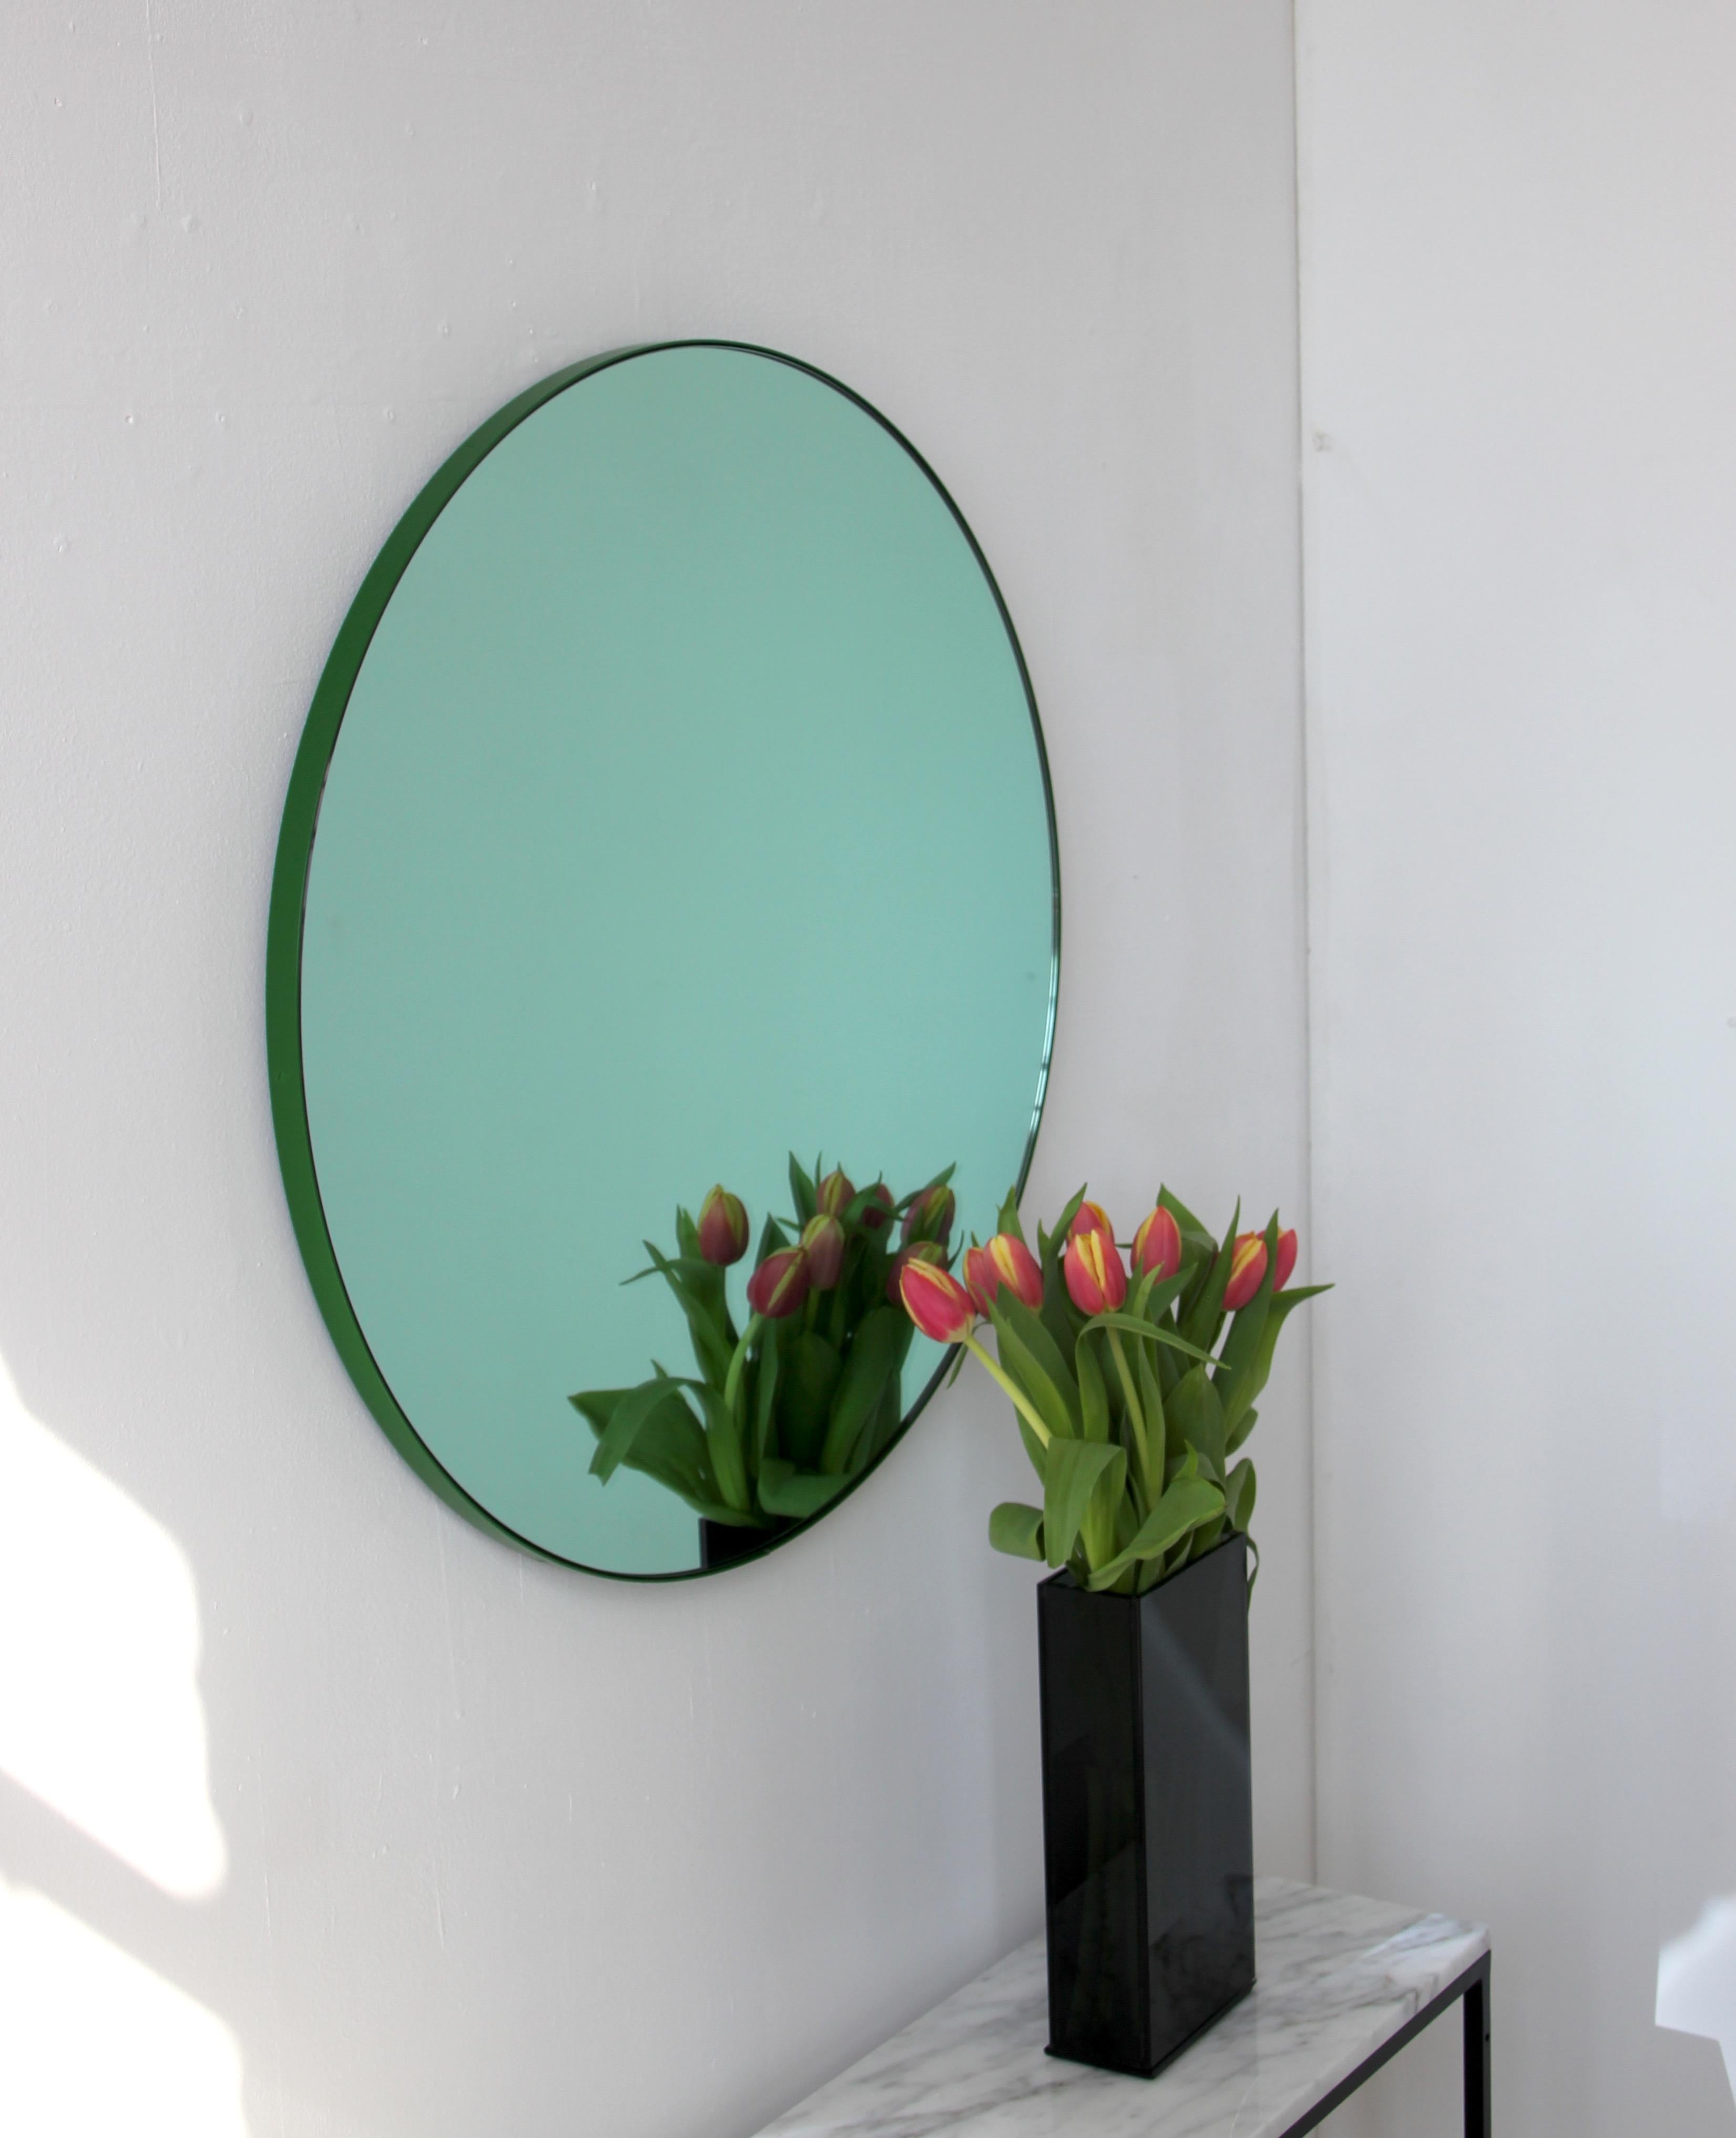 Contemporary Orbis Green Tinted Handcrafted Round Mirror with Green Frame, Regular